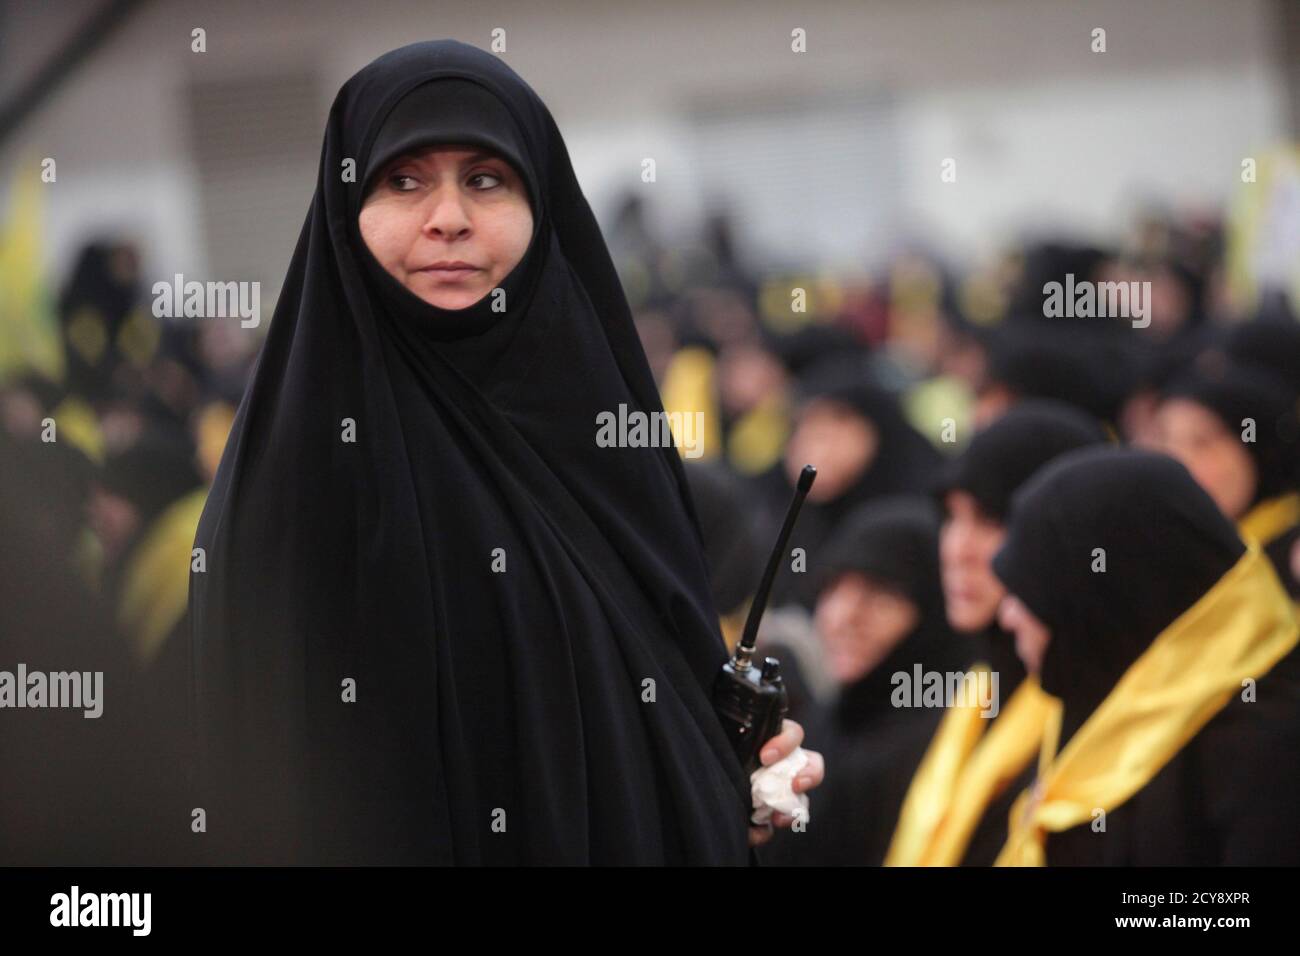 a-woman-carries-a-walkie-talkie-as-lebanons-hezbollah-leader-sayyed-hassan-nasrallah-appears-on-a-screen-to-speak-at-an-event-to-commemorate-the-deaths-of-six-hezbollah-fighters-and-an-iranian-general-killed-by-an-israeli-air-strike-in-syria-on-january-18-in-beiruts-southern-suburbs-january-30-2015-nasrallah-said-on-friday-his-group-did-not-want-war-with-israel-but-was-ready-for-one-and-had-the-right-to-respond-to-israeli-aggression-in-any-time-and-place-reuterskhalil-hassan-lebanon-tags-politics-civil-unrest-conflict-2CY8XPR.jpg